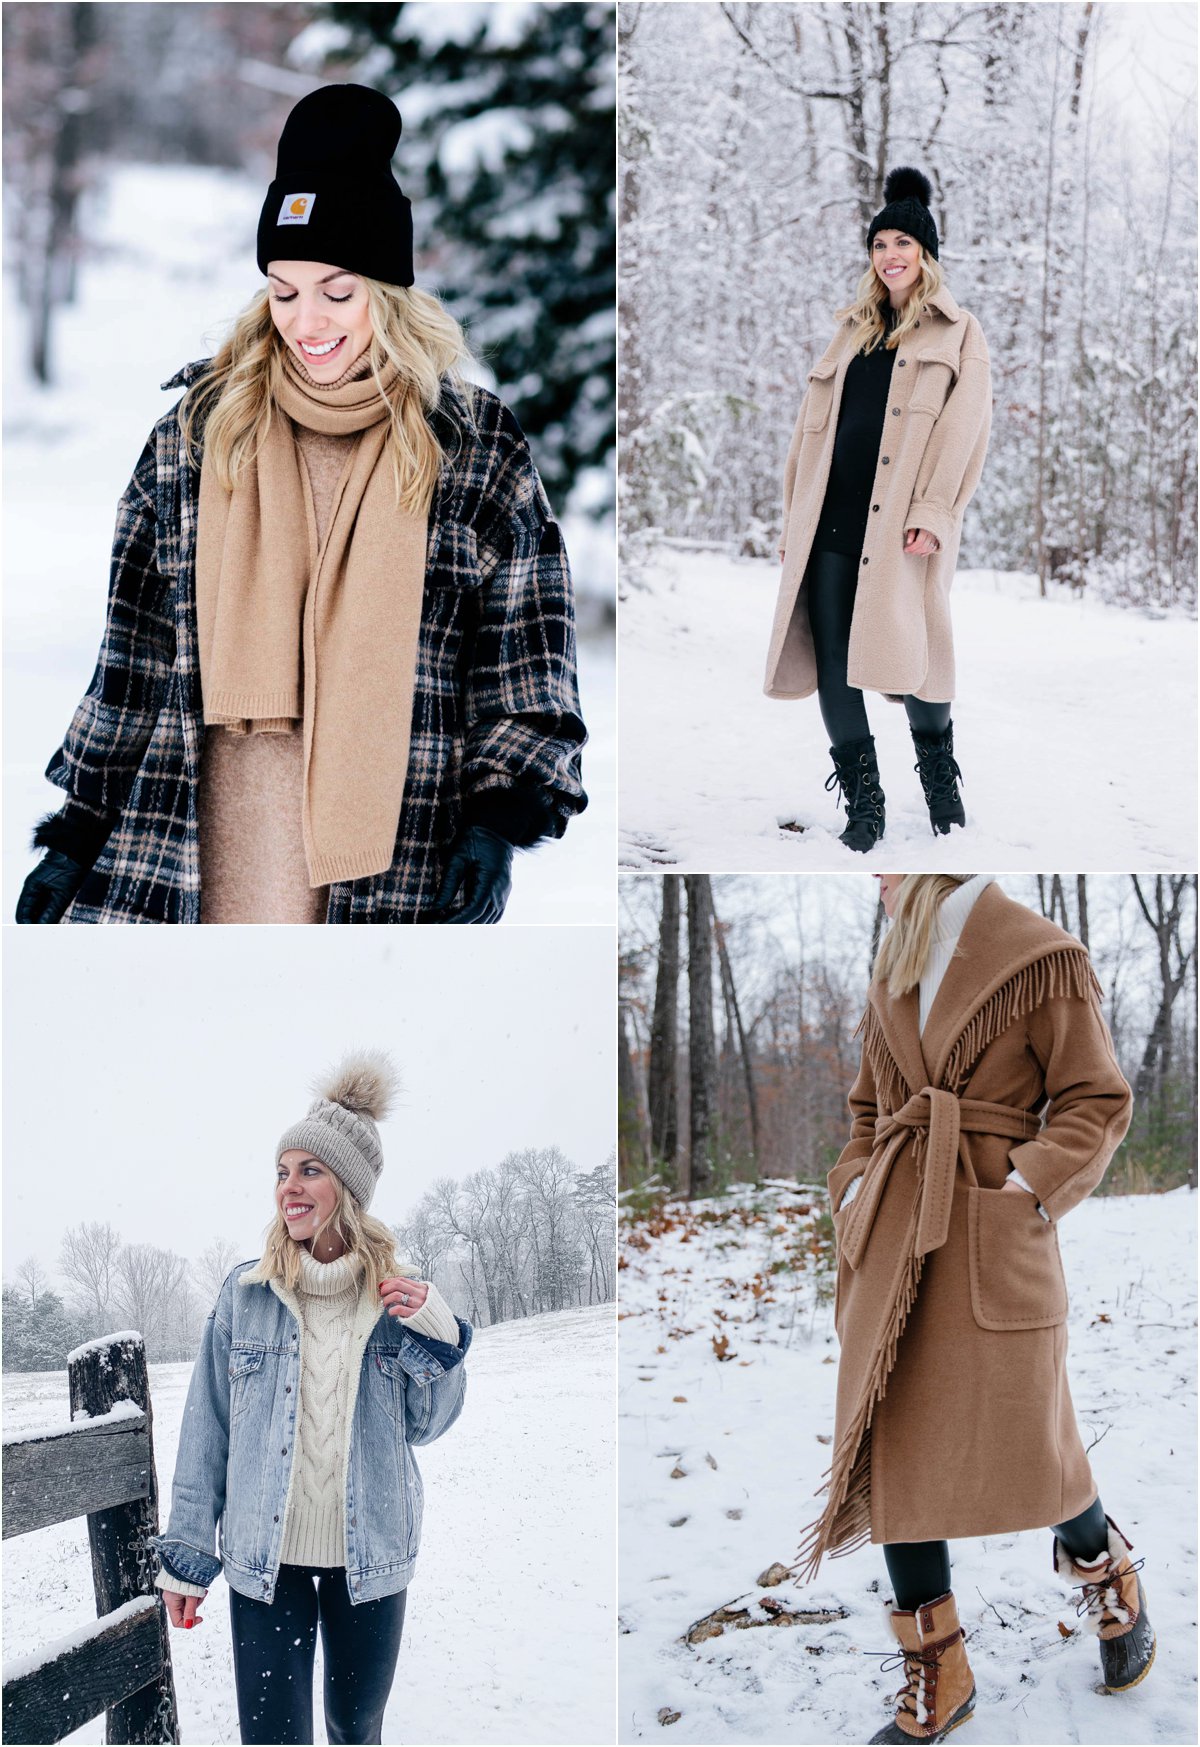 Snow Chic vs. Snow Freak: A Guide to Looking Hot on the Snow